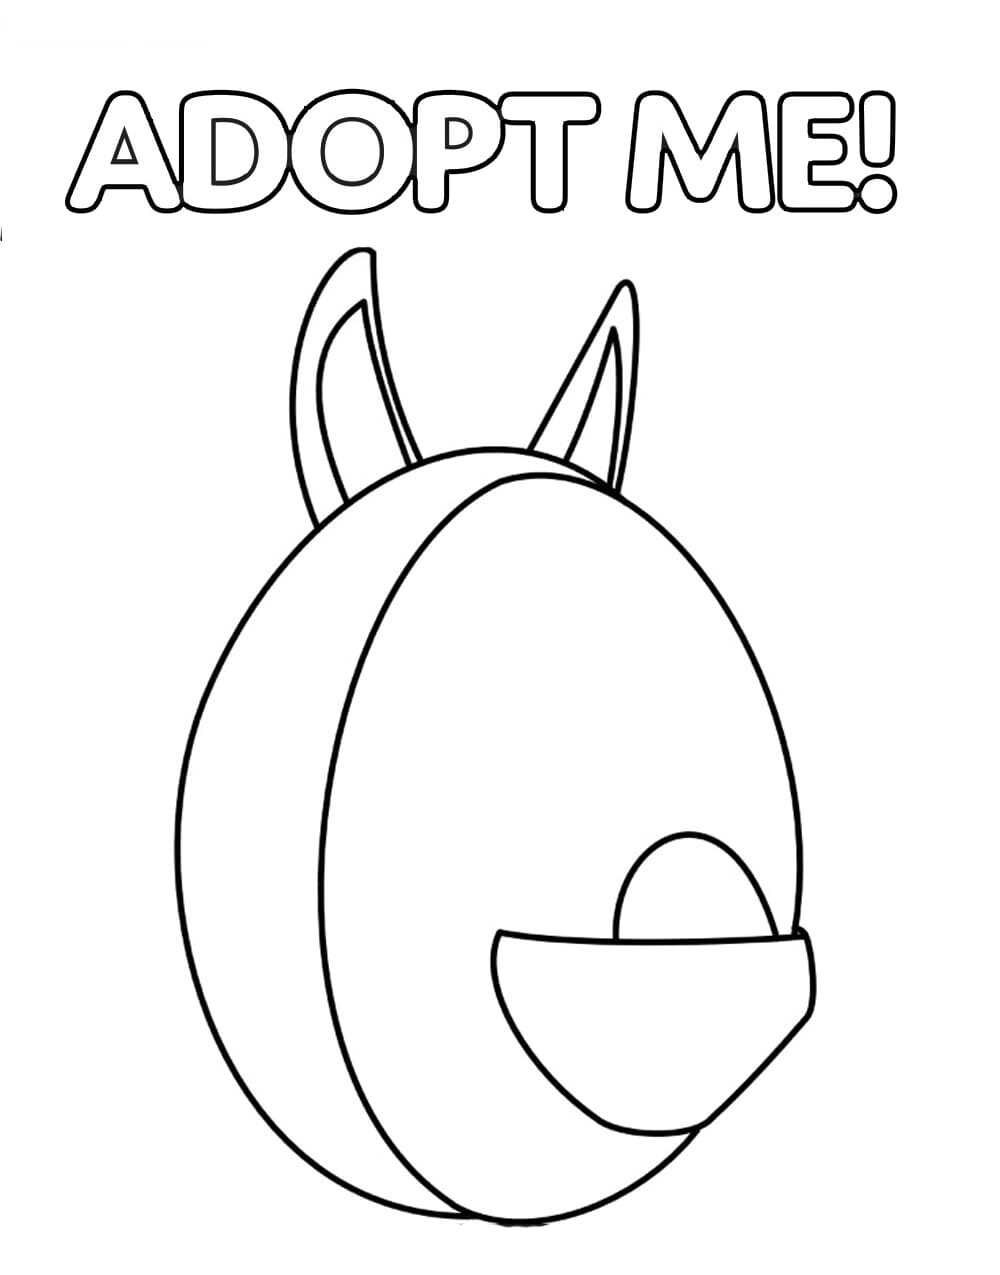 Adopt me Aussie egg from the Gumball Machine Coloring Pages ...